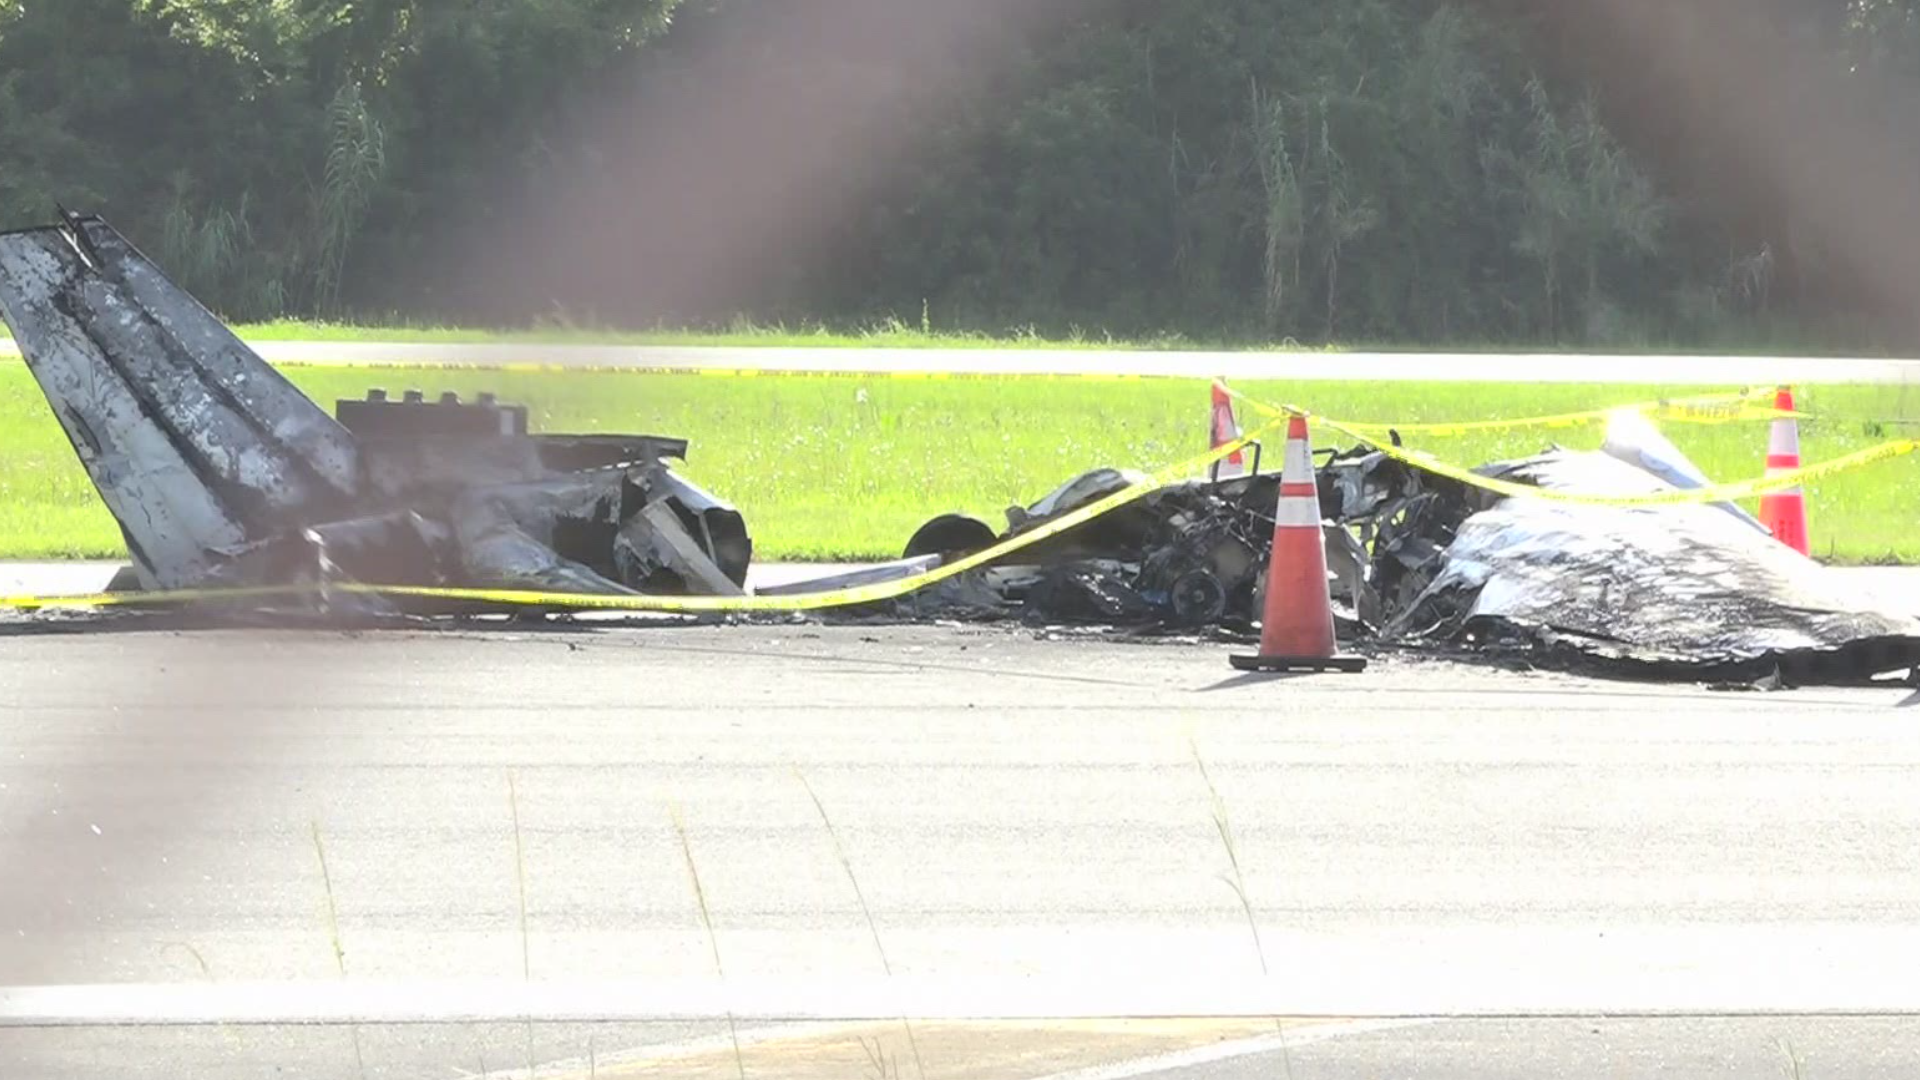 Flight instructor, prospective student killed after small plane crashes at Northeast Florida Regional Airport